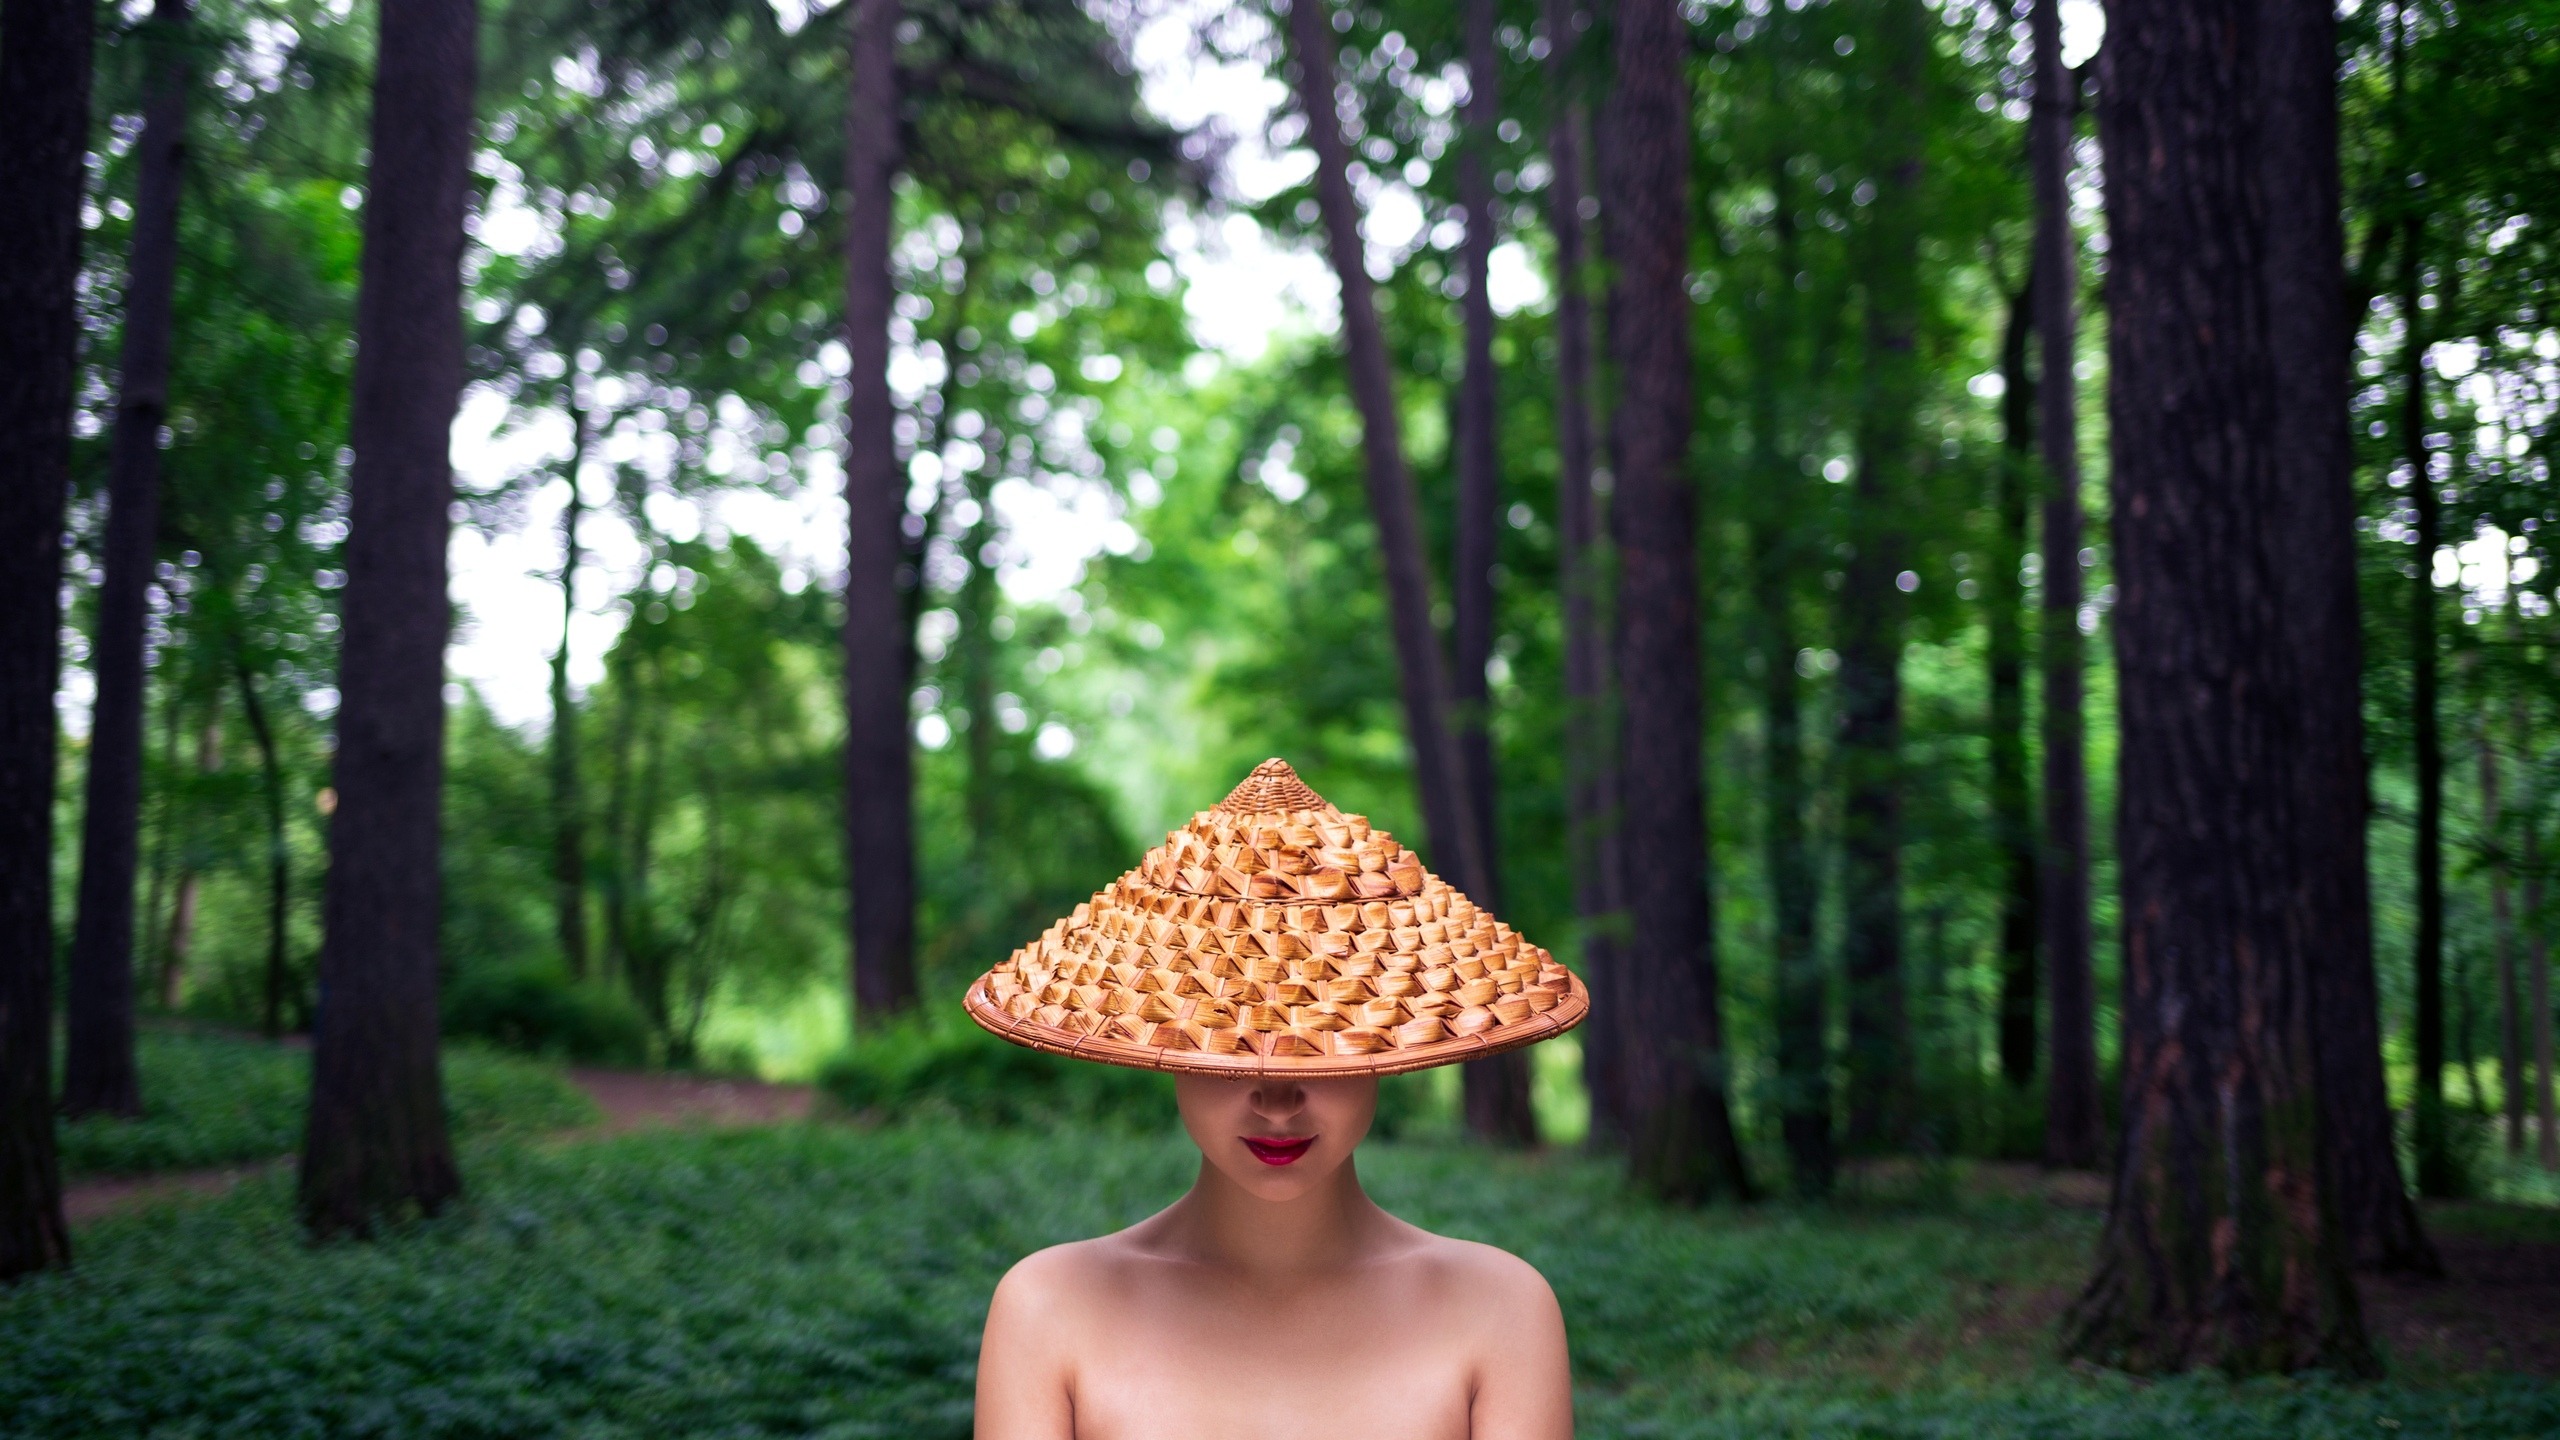 Women Model Portrait Red Lipstick Face Lips Bare Shoulders Trees Forest Outdoors Women With Hats Hat 2560x1440